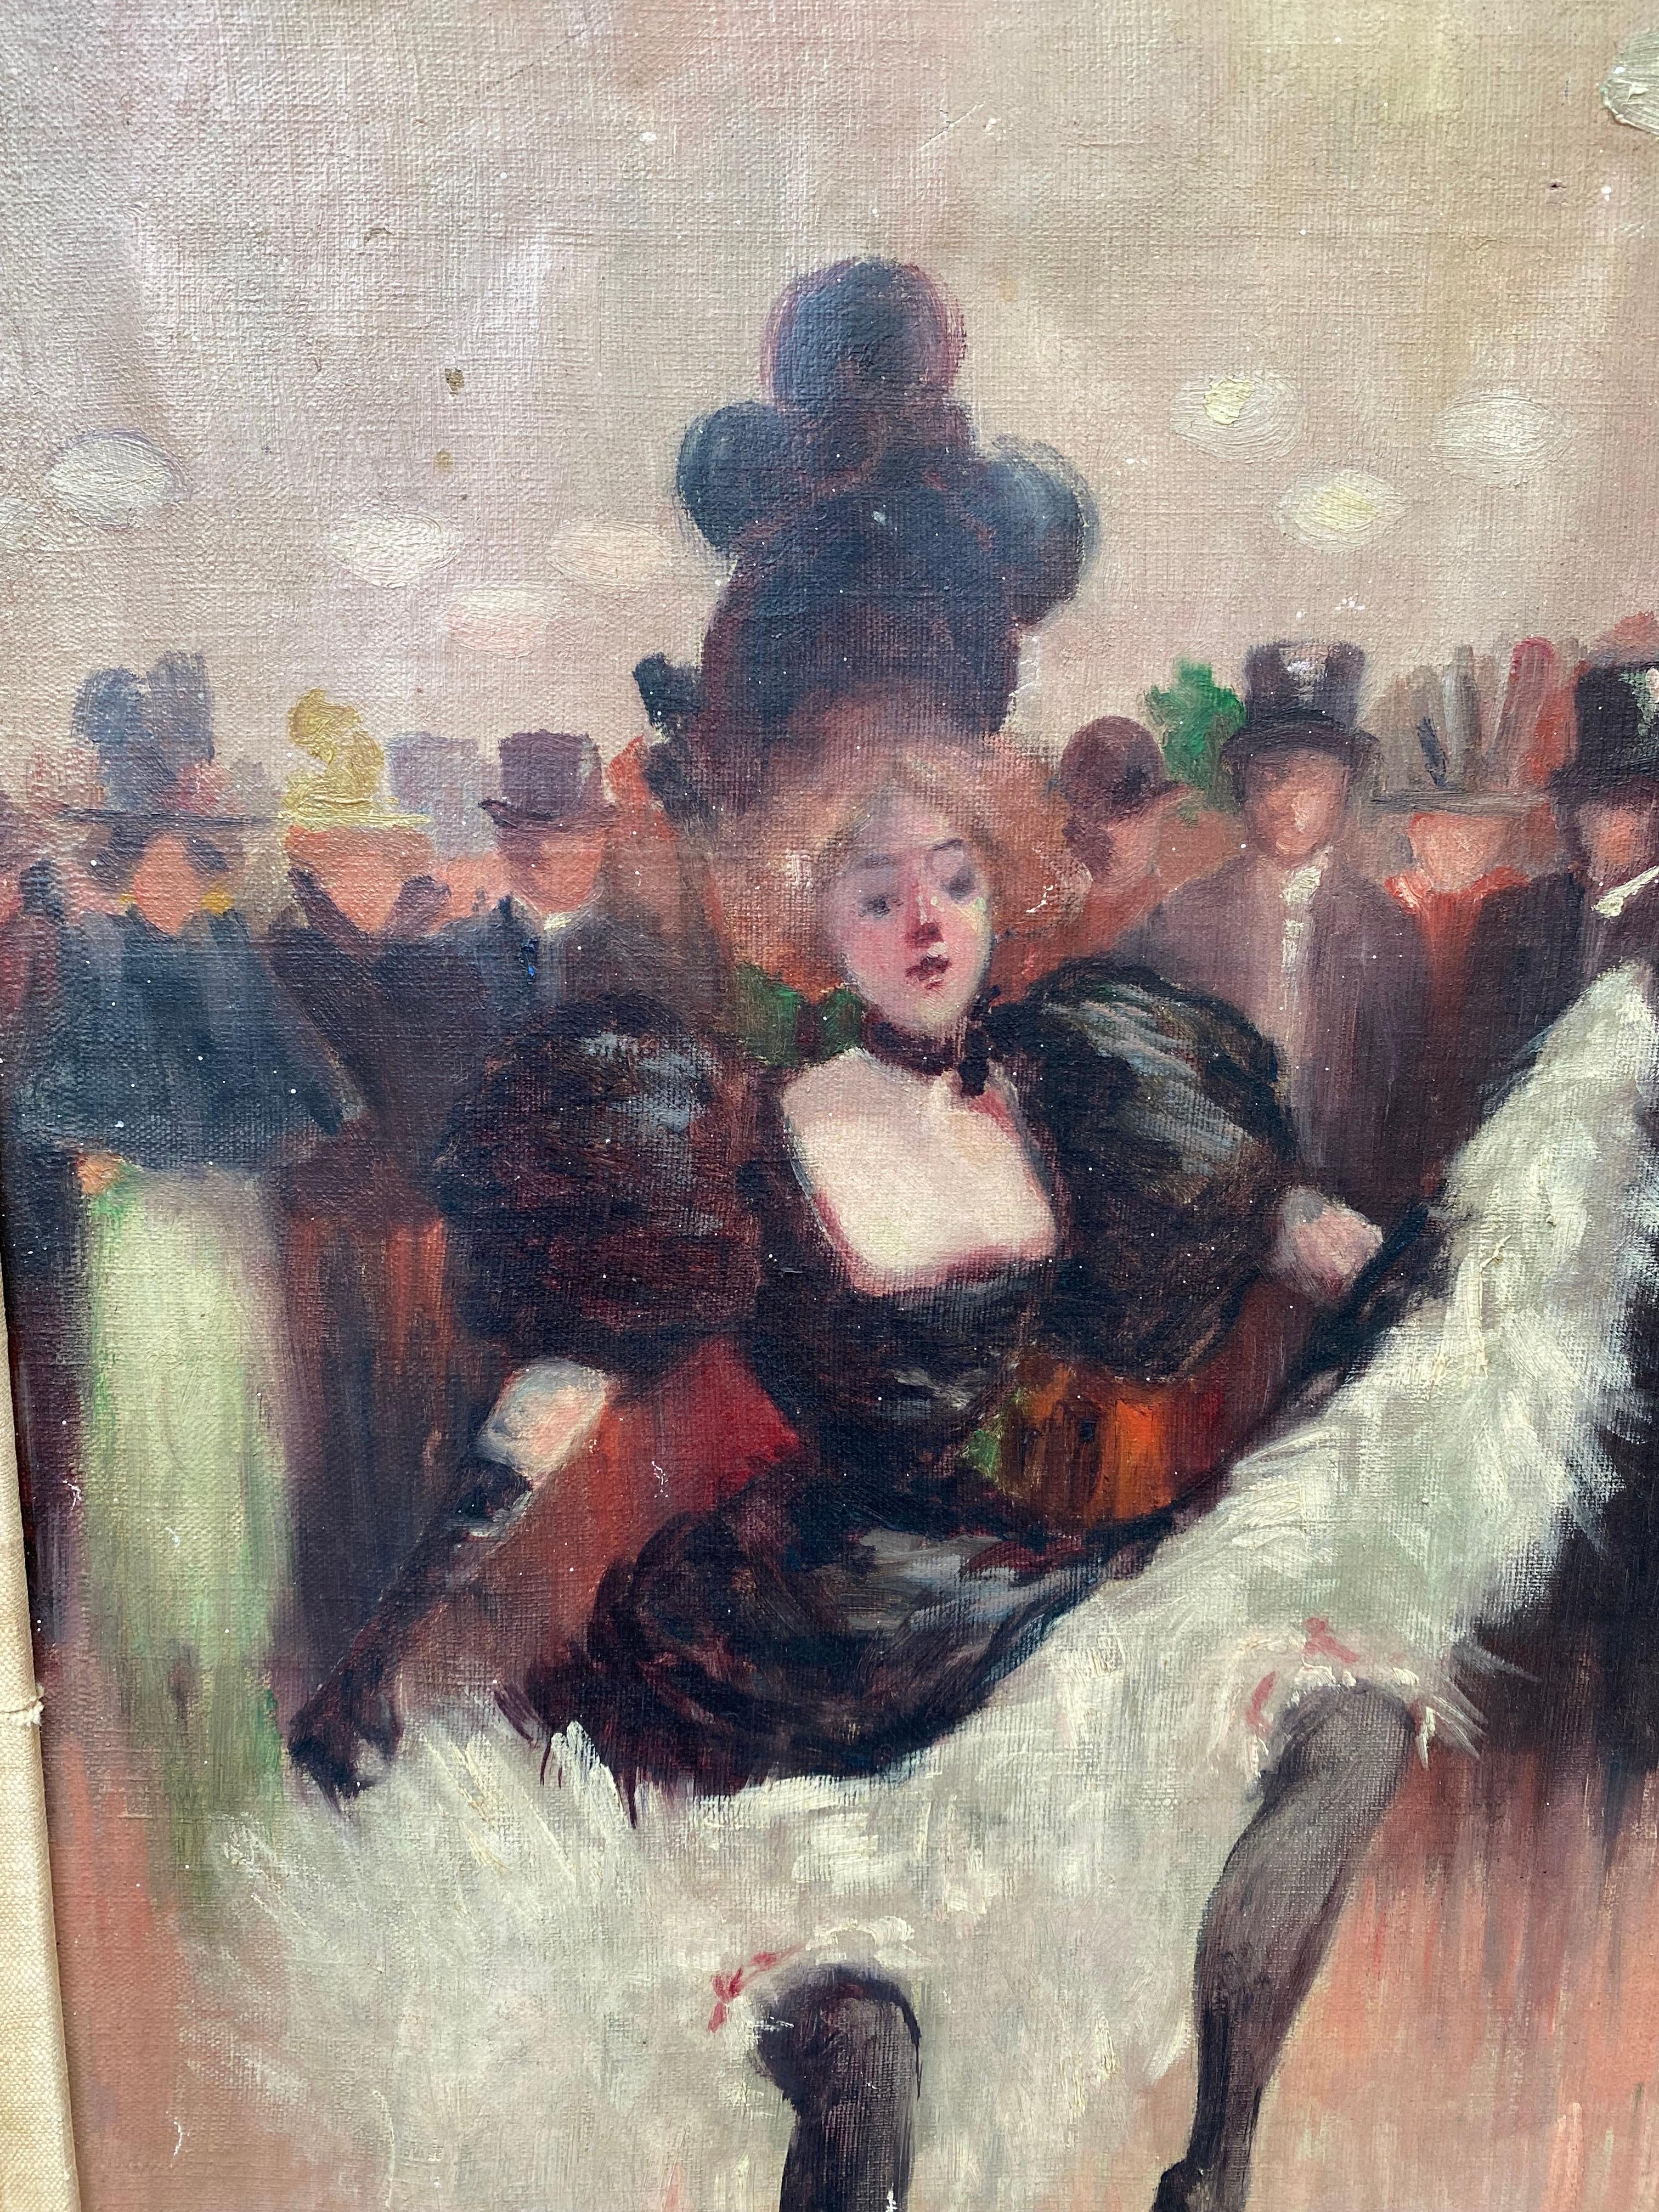 Henri de Toulouse-Lautrec style dance hall girl. Nice quality with a great look!